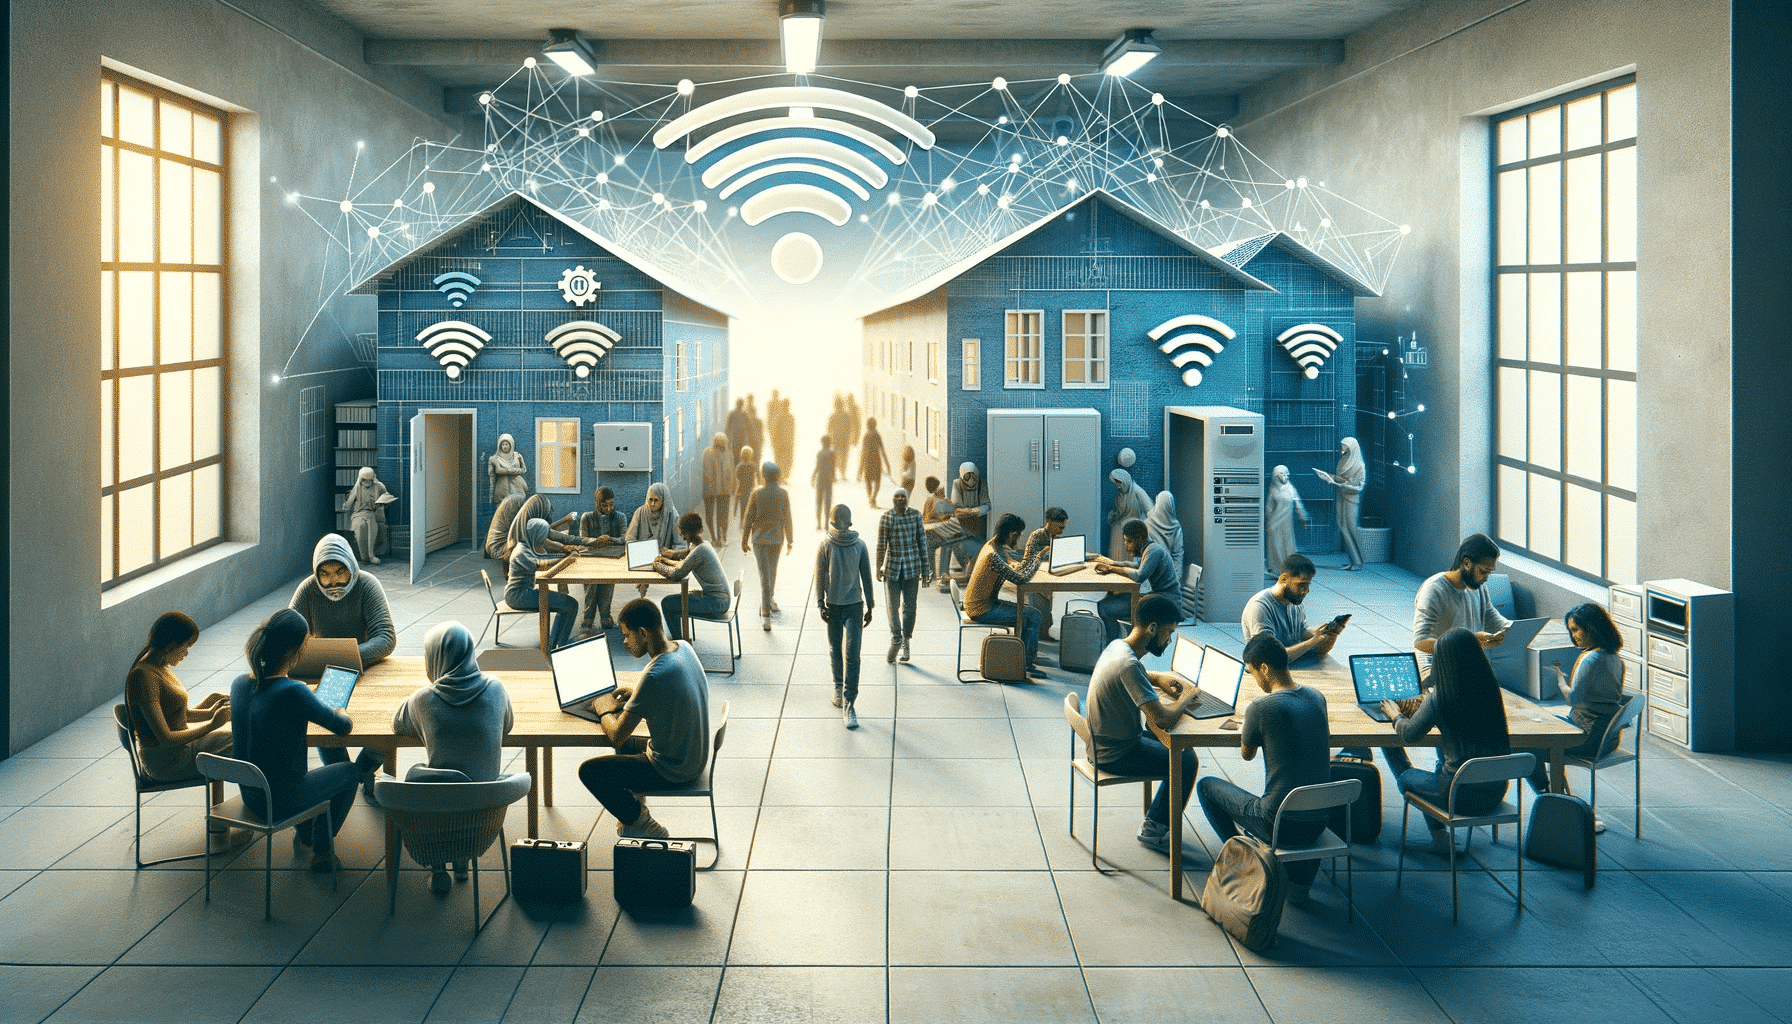 Modern and professional header image for a website, showing an advanced and secure WLAN network in a refugee shelter. Pictured is a diverse group of people from different backgrounds using various digital devices such as smartphones, tablets and laptops, all connected to a robust and secure Wi-Fi network. The environment is clean, organized and features a communal living space with discreetly integrated Wi-Fi routers and access points. The atmosphere conveys a sense of community, connectivity and digital inclusion.